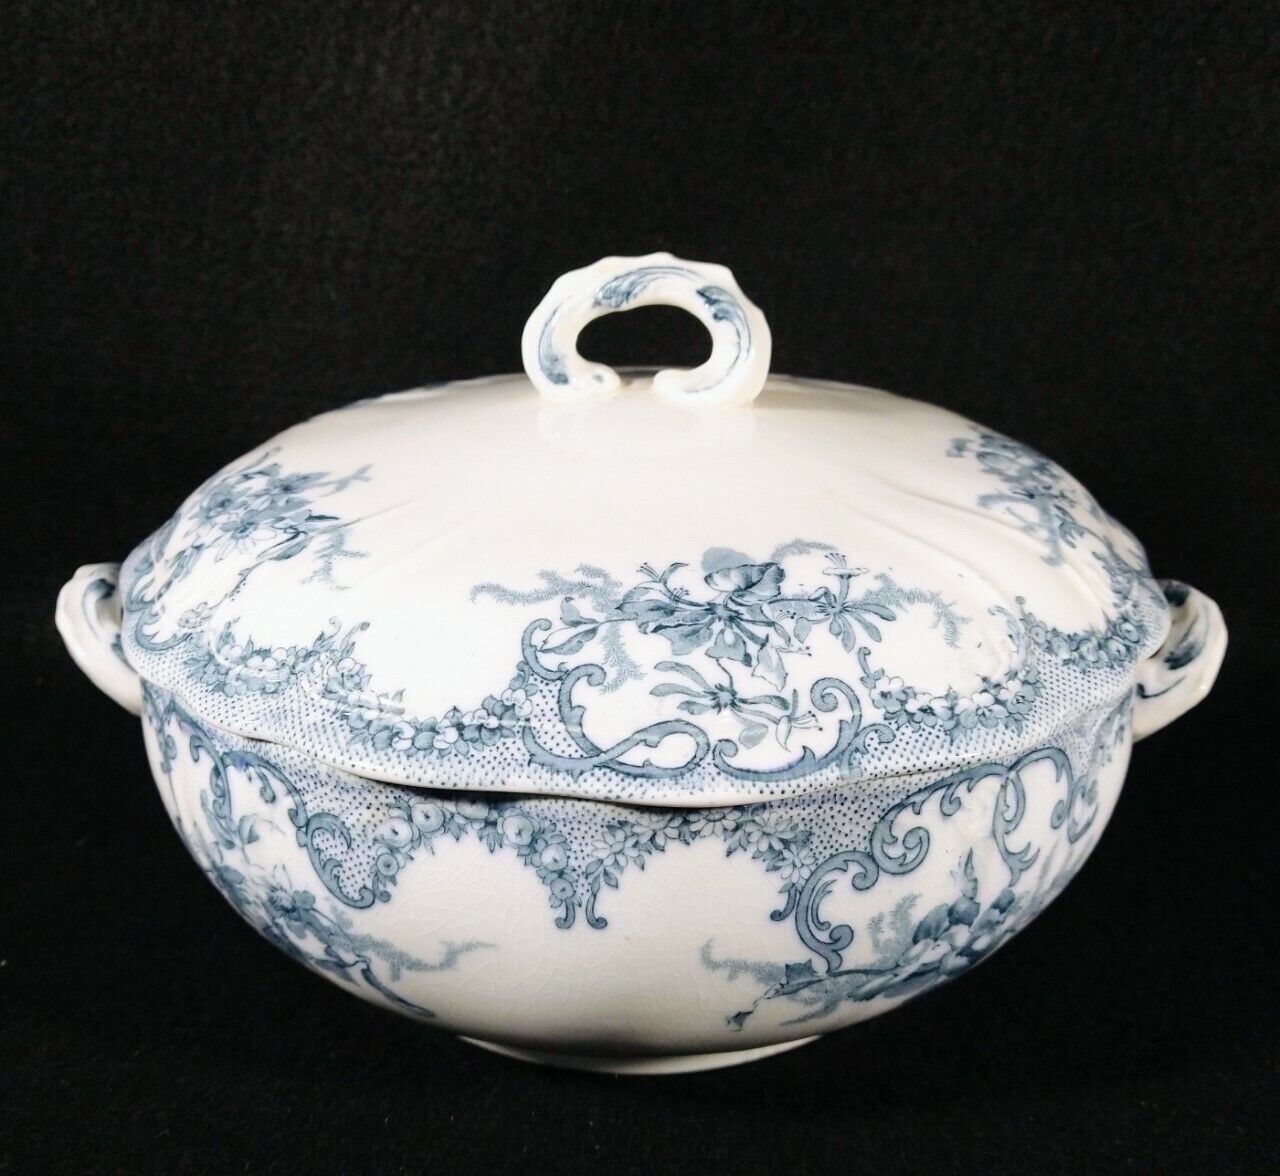 Antique Furnivals covered tureen Versailles pattern